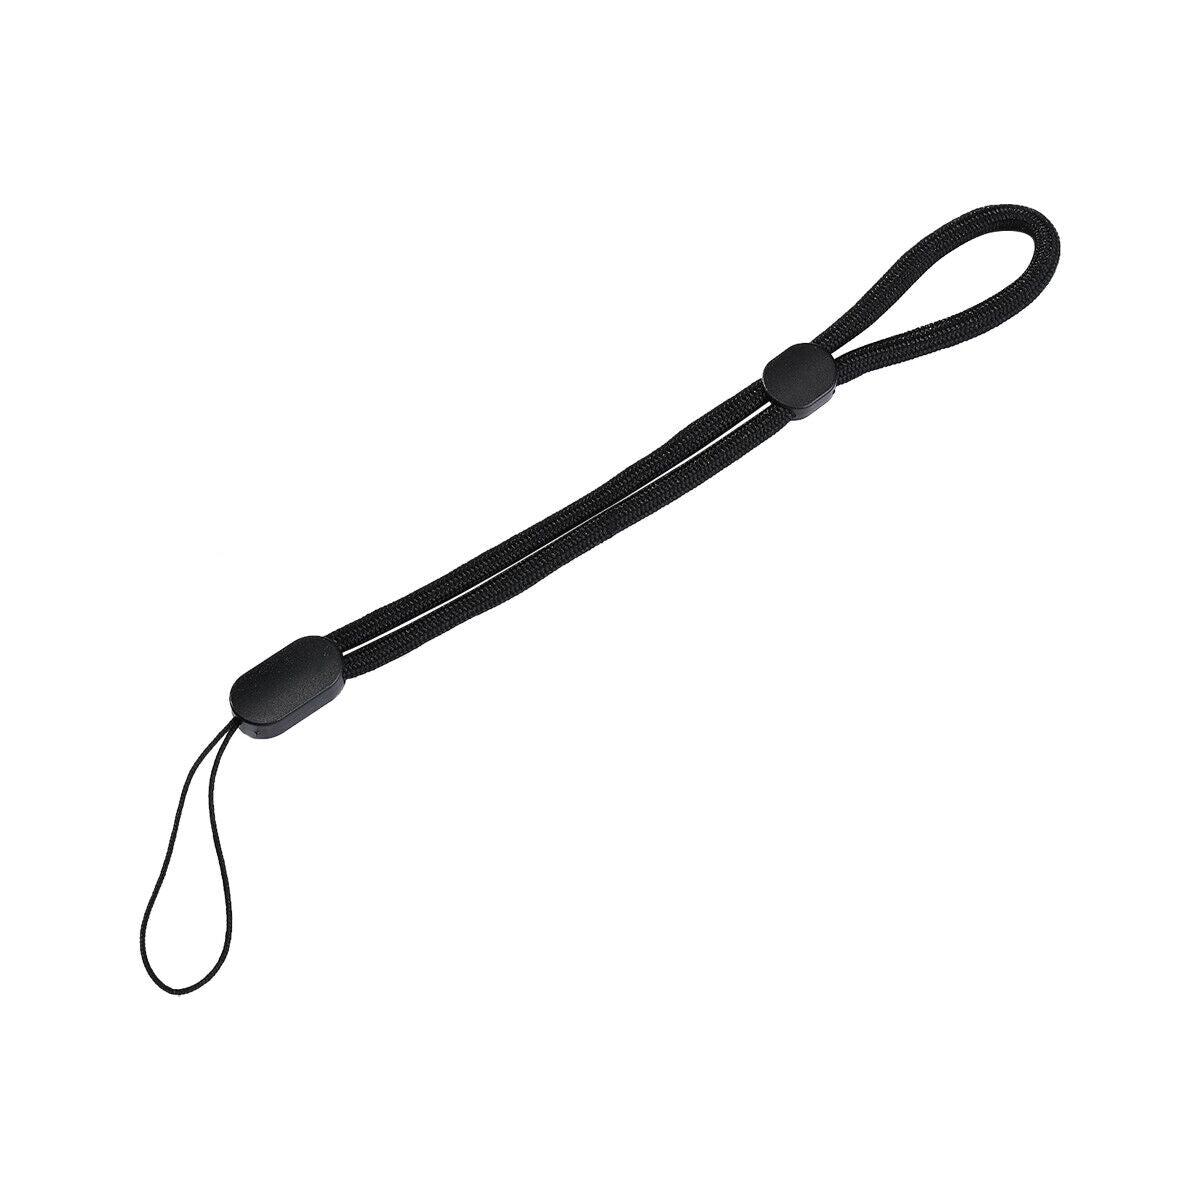 SPARES Wrist Strap Lanyard for Torches